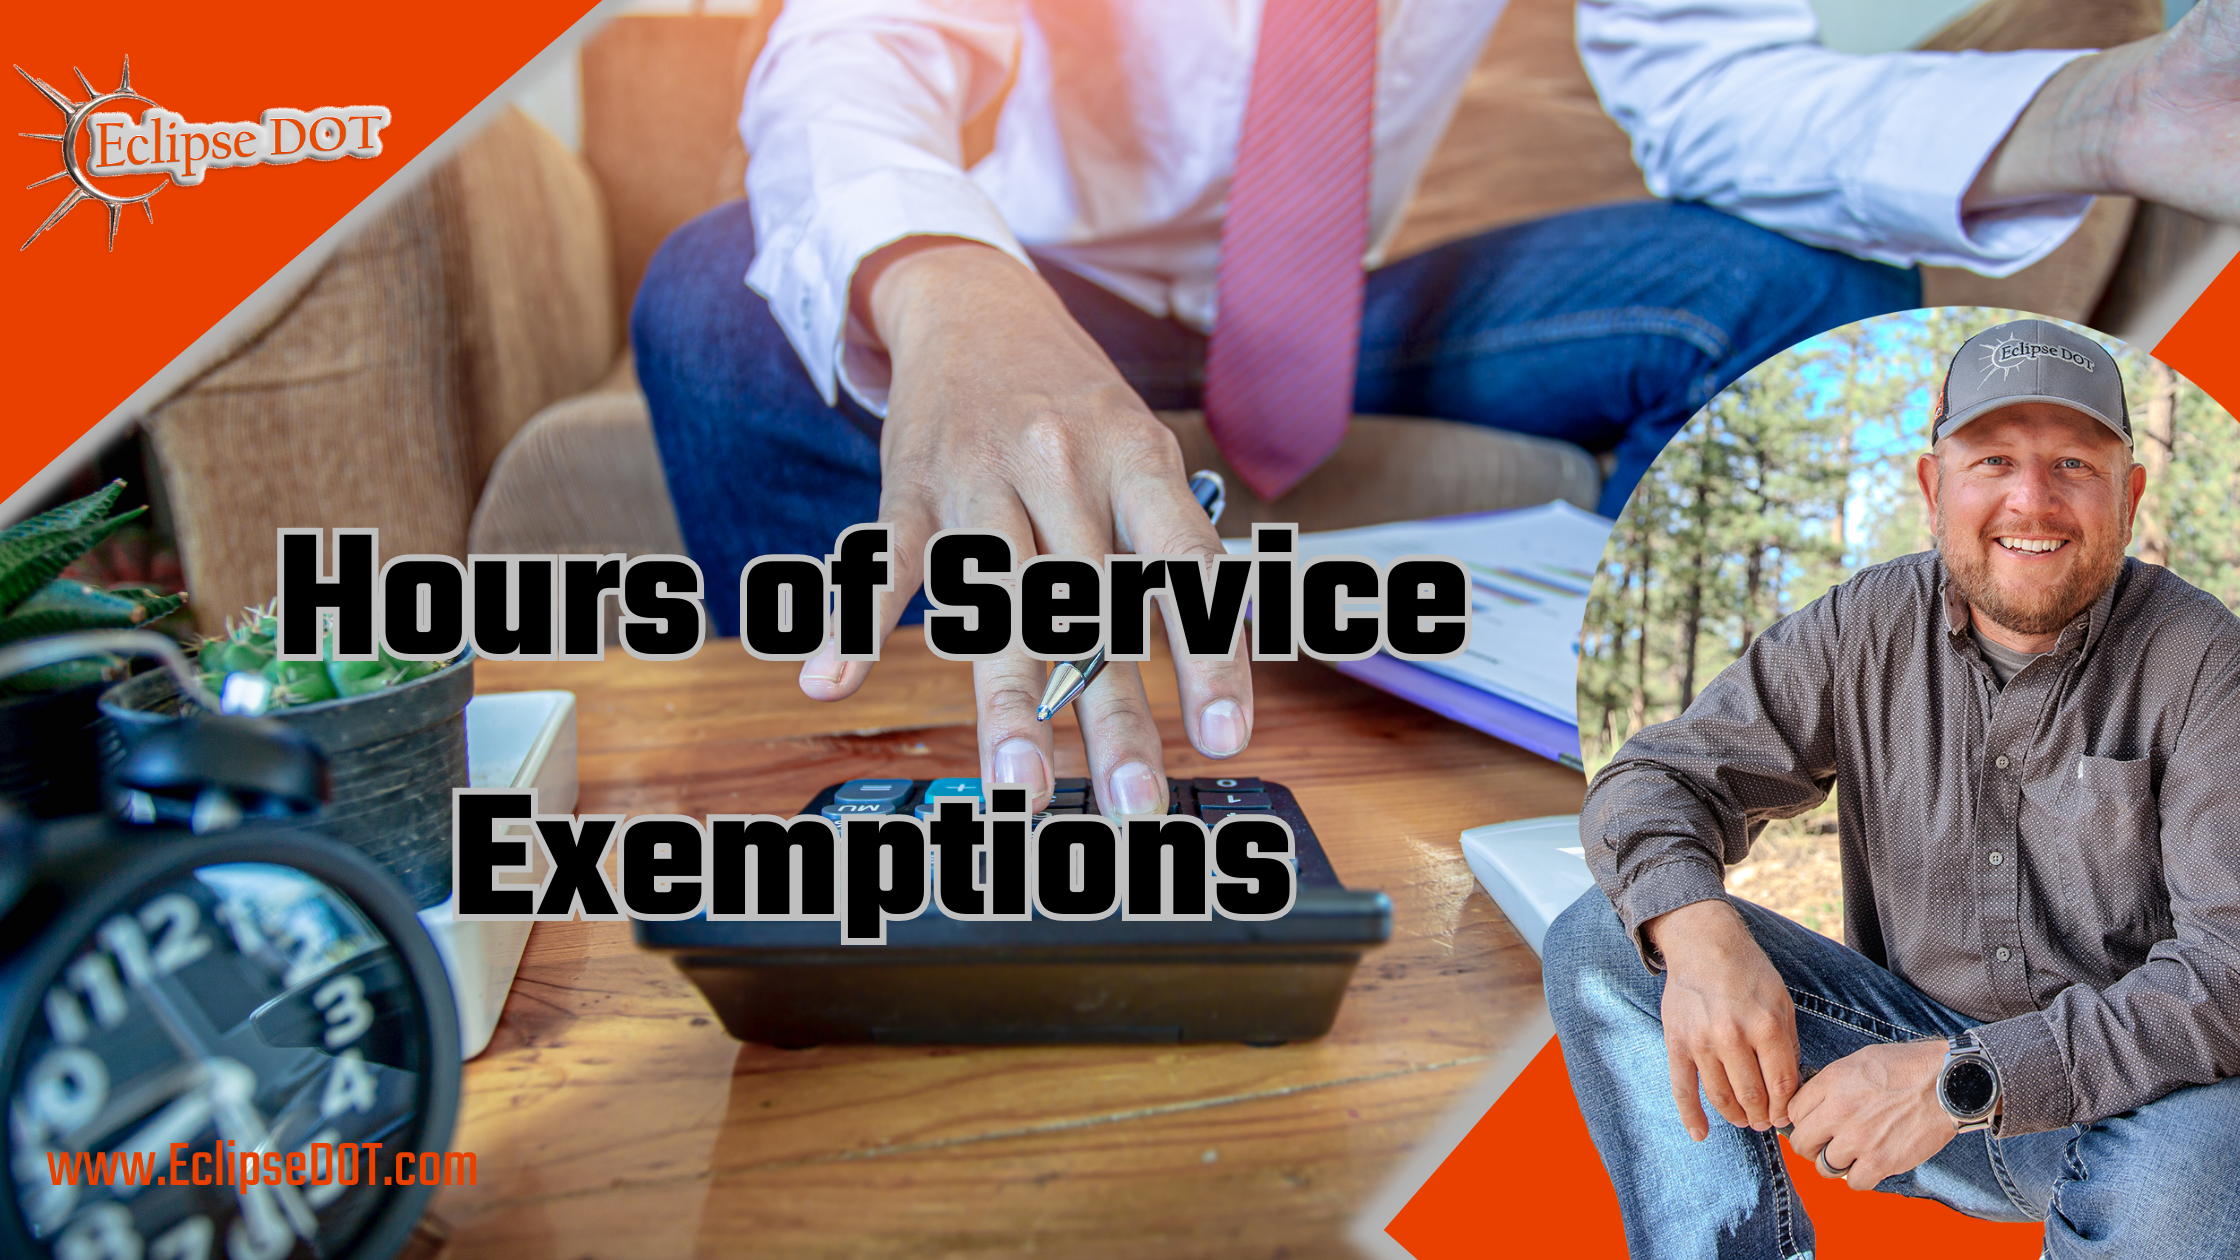 Image showing a clock with "Hours of Service Exemptions" written on it, symbolizing the topic of the article.